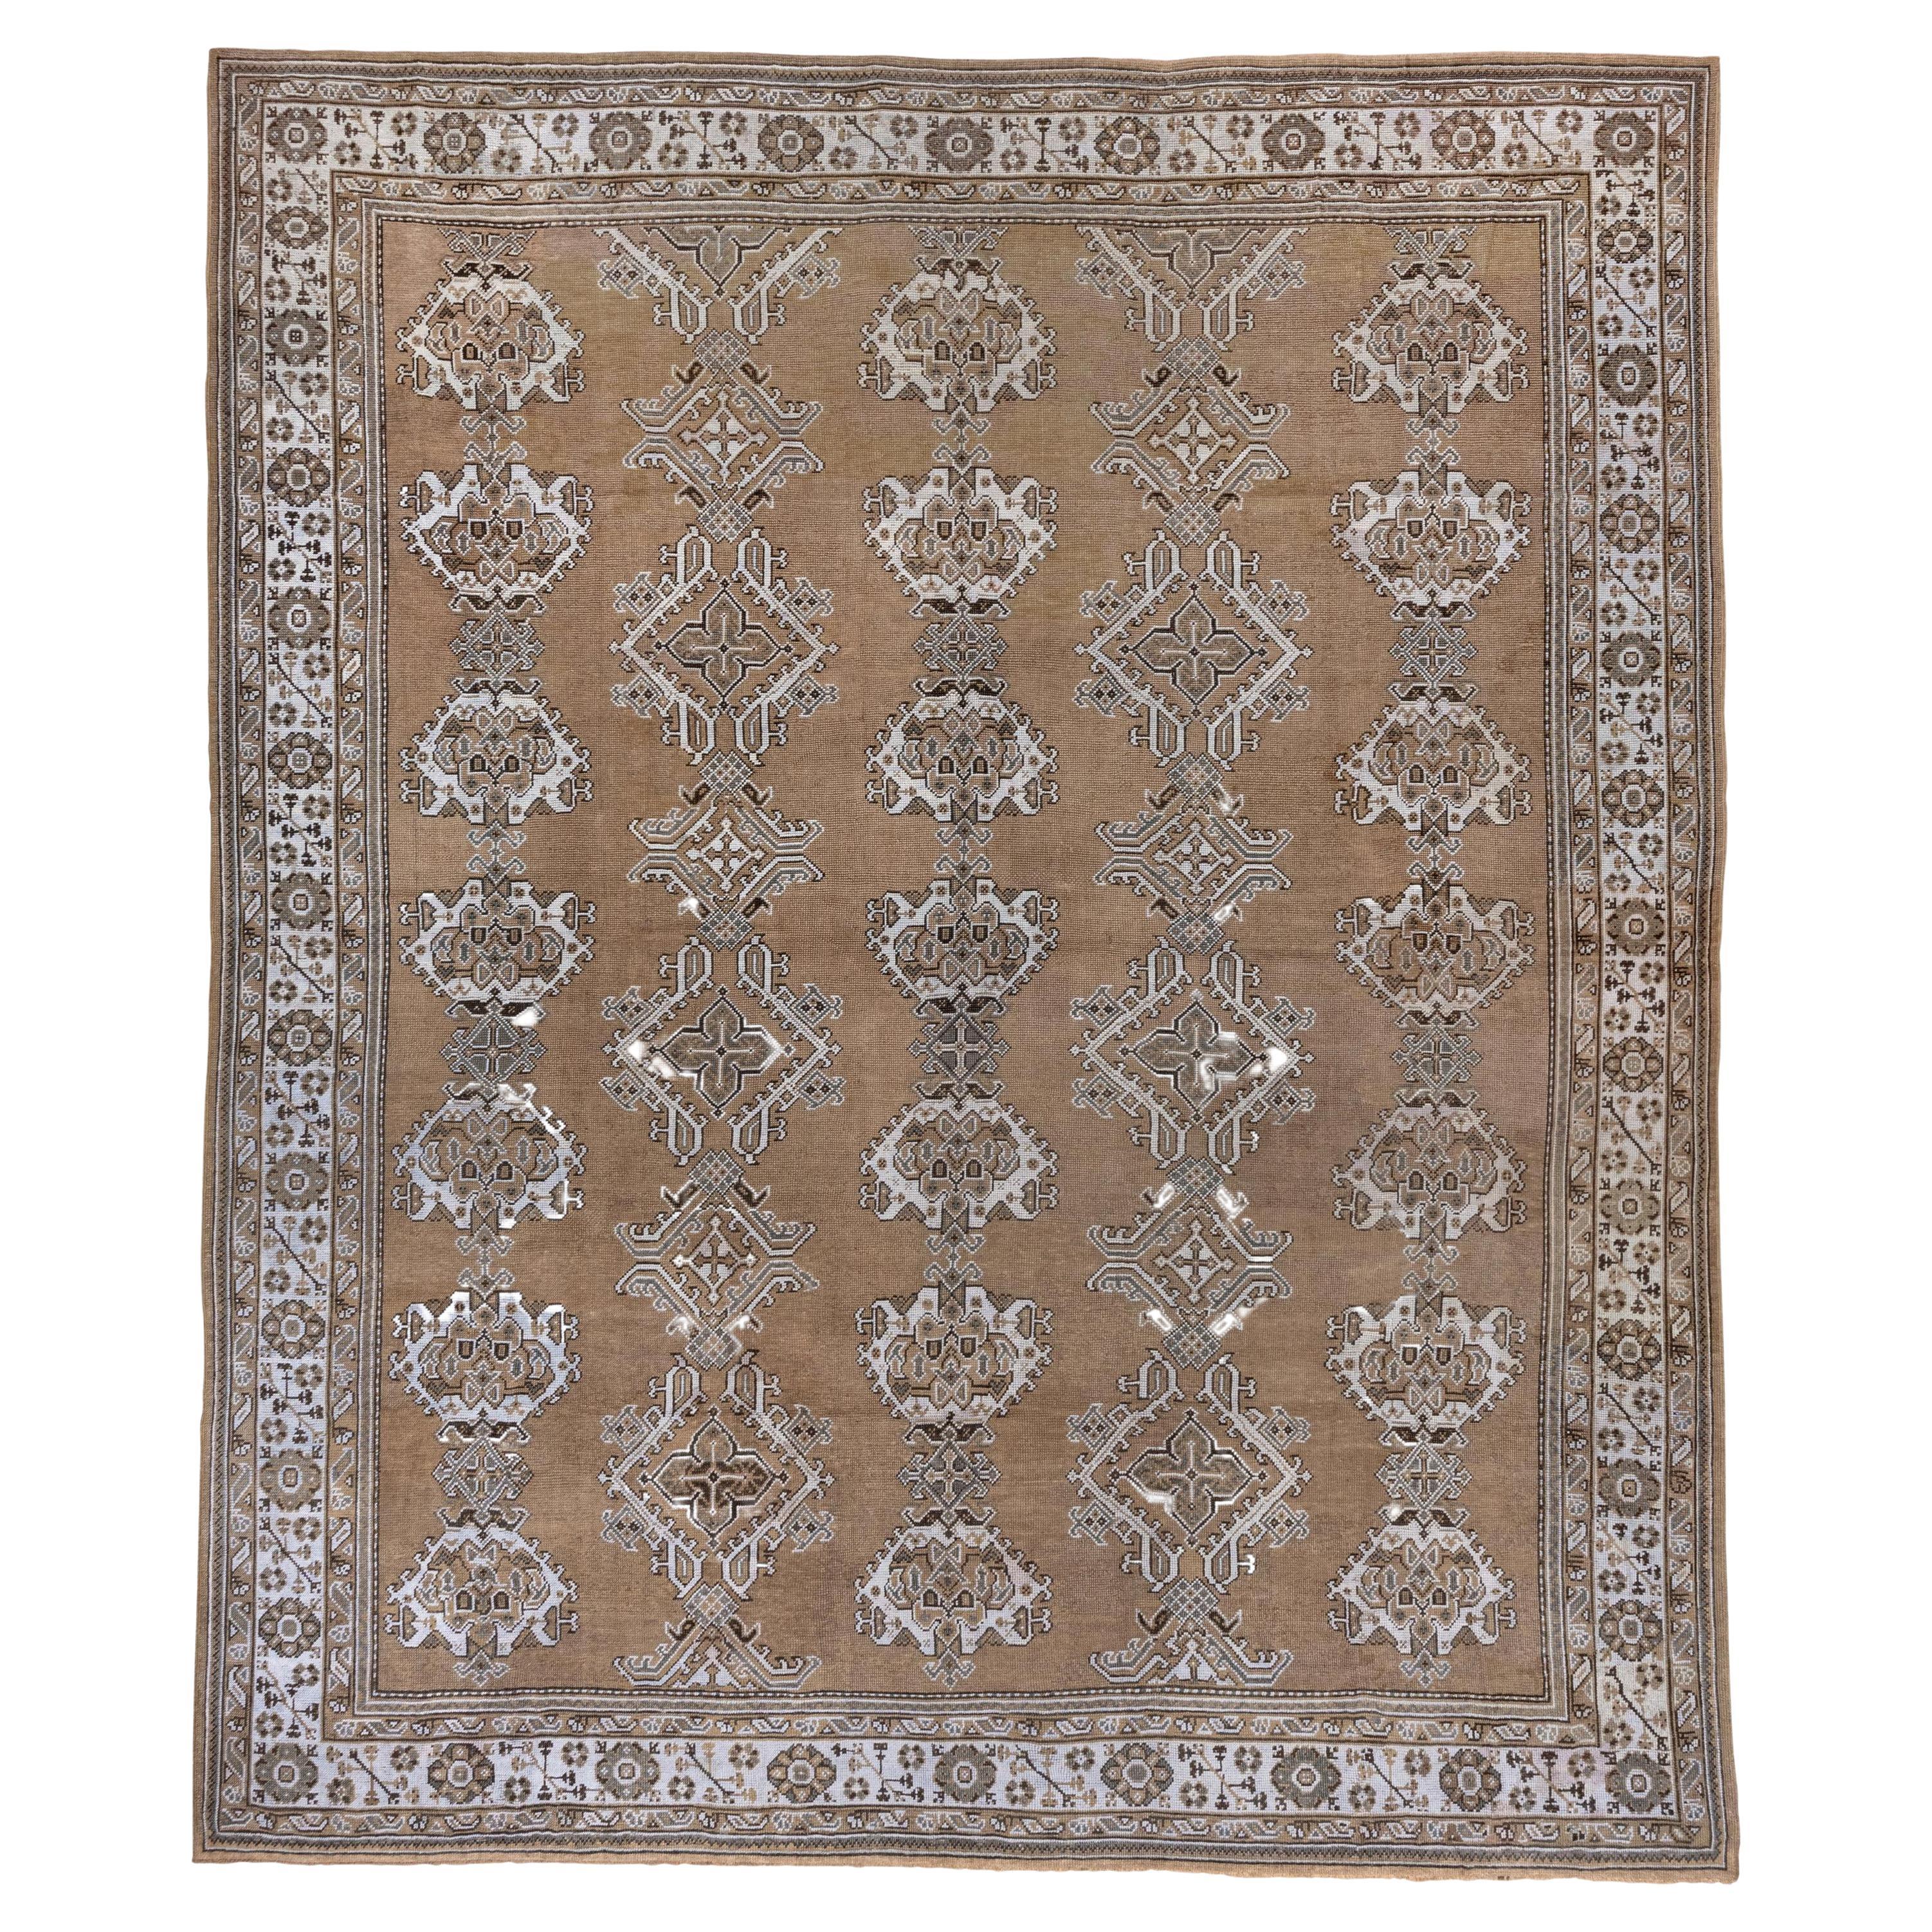 Antique Oushak Rug, Brown Field, Light Blue Borders and Motifs For Sale